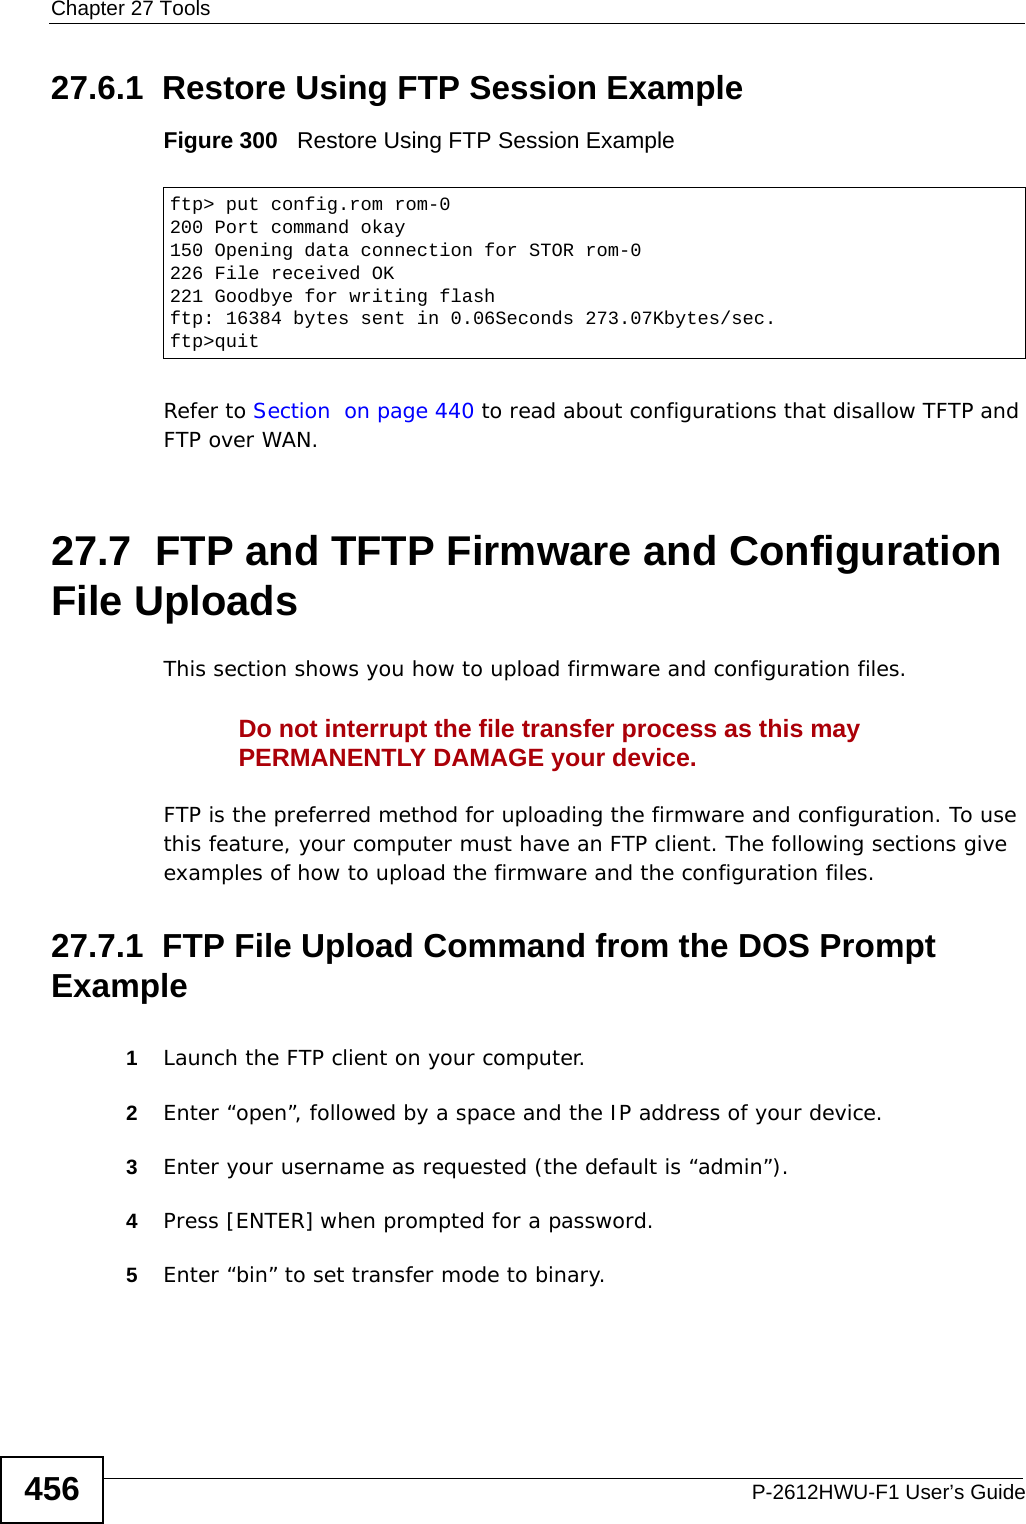 Chapter 27 ToolsP-2612HWU-F1 User’s Guide45627.6.1  Restore Using FTP Session ExampleFigure 300   Restore Using FTP Session ExampleRefer to Section  on page 440 to read about configurations that disallow TFTP and FTP over WAN.27.7  FTP and TFTP Firmware and Configuration File UploadsThis section shows you how to upload firmware and configuration files. Do not interrupt the file transfer process as this may PERMANENTLY DAMAGE your device. FTP is the preferred method for uploading the firmware and configuration. To use this feature, your computer must have an FTP client. The following sections give examples of how to upload the firmware and the configuration files.27.7.1  FTP File Upload Command from the DOS Prompt Example1Launch the FTP client on your computer.2Enter “open”, followed by a space and the IP address of your device.  3Enter your username as requested (the default is “admin”).4Press [ENTER] when prompted for a password.5Enter “bin” to set transfer mode to binary.ftp&gt; put config.rom rom-0200 Port command okay150 Opening data connection for STOR rom-0226 File received OK221 Goodbye for writing flashftp: 16384 bytes sent in 0.06Seconds 273.07Kbytes/sec.ftp&gt;quit